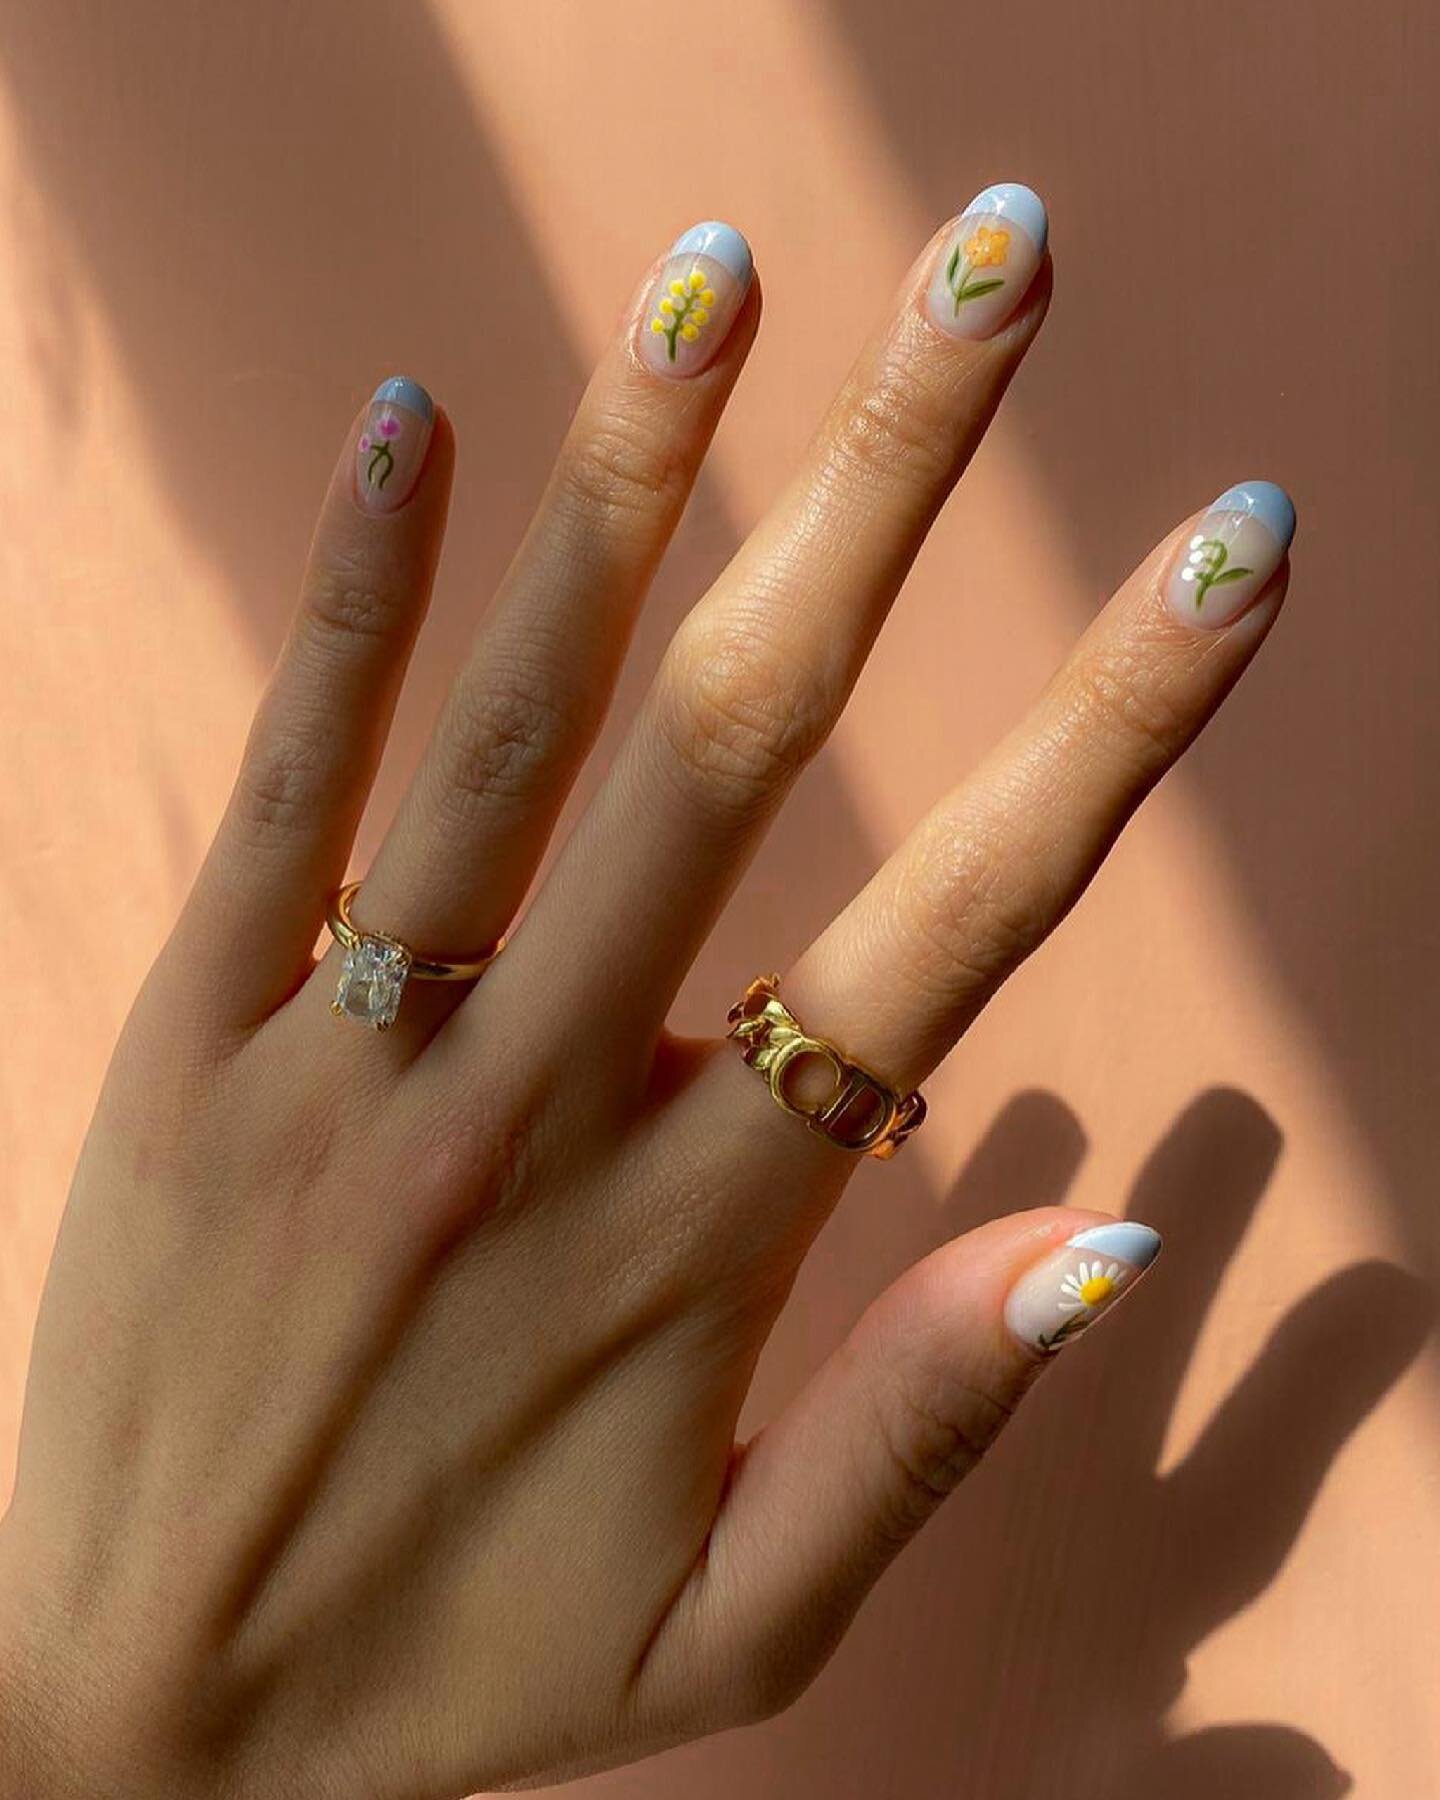 🌷Ditzy florals and pastel tips for this cottage core inspired nail design by @samishome ﻿
﻿
💅🏻Done by our Nail Artist Meiko﻿
﻿
📲 Whatsapp us through the link in bio or click the Book Now button to reserve your slot!﻿
﻿
#FreshlyTinted﻿
﻿
#flowerna